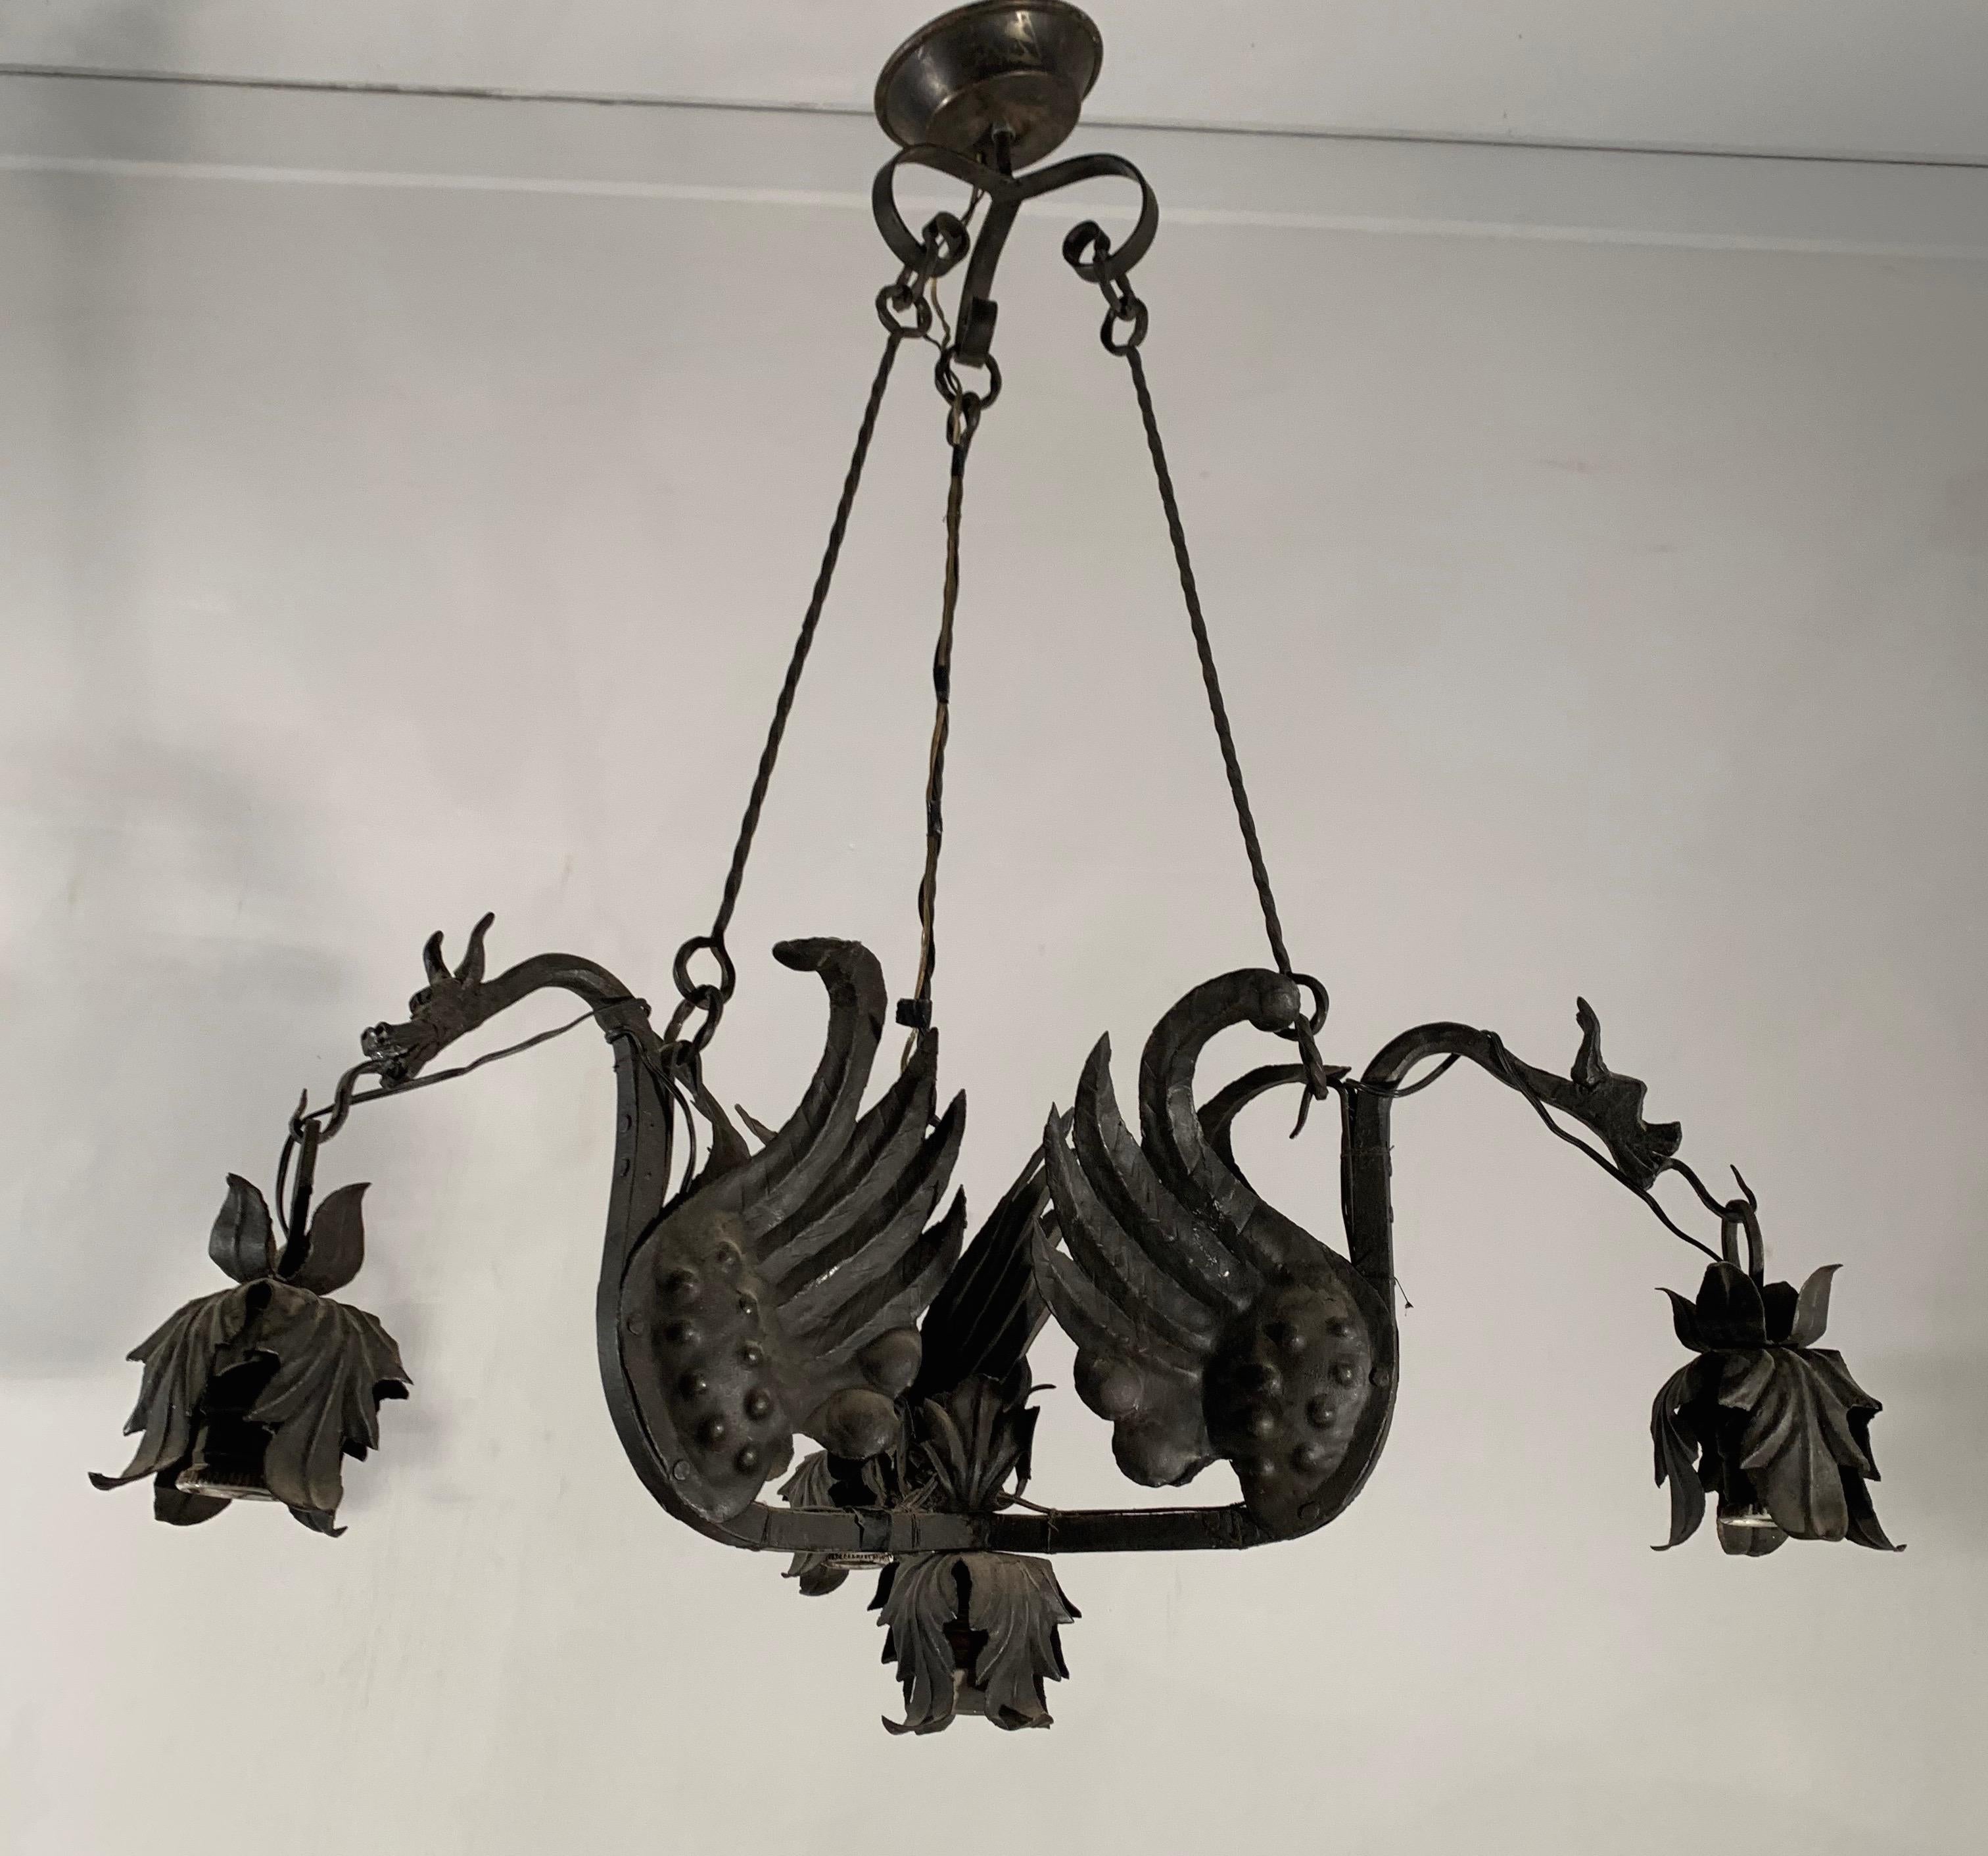 Awesome Italian Pendant / Metal Art Light Fixture with Flying Dragon Sculptures 3